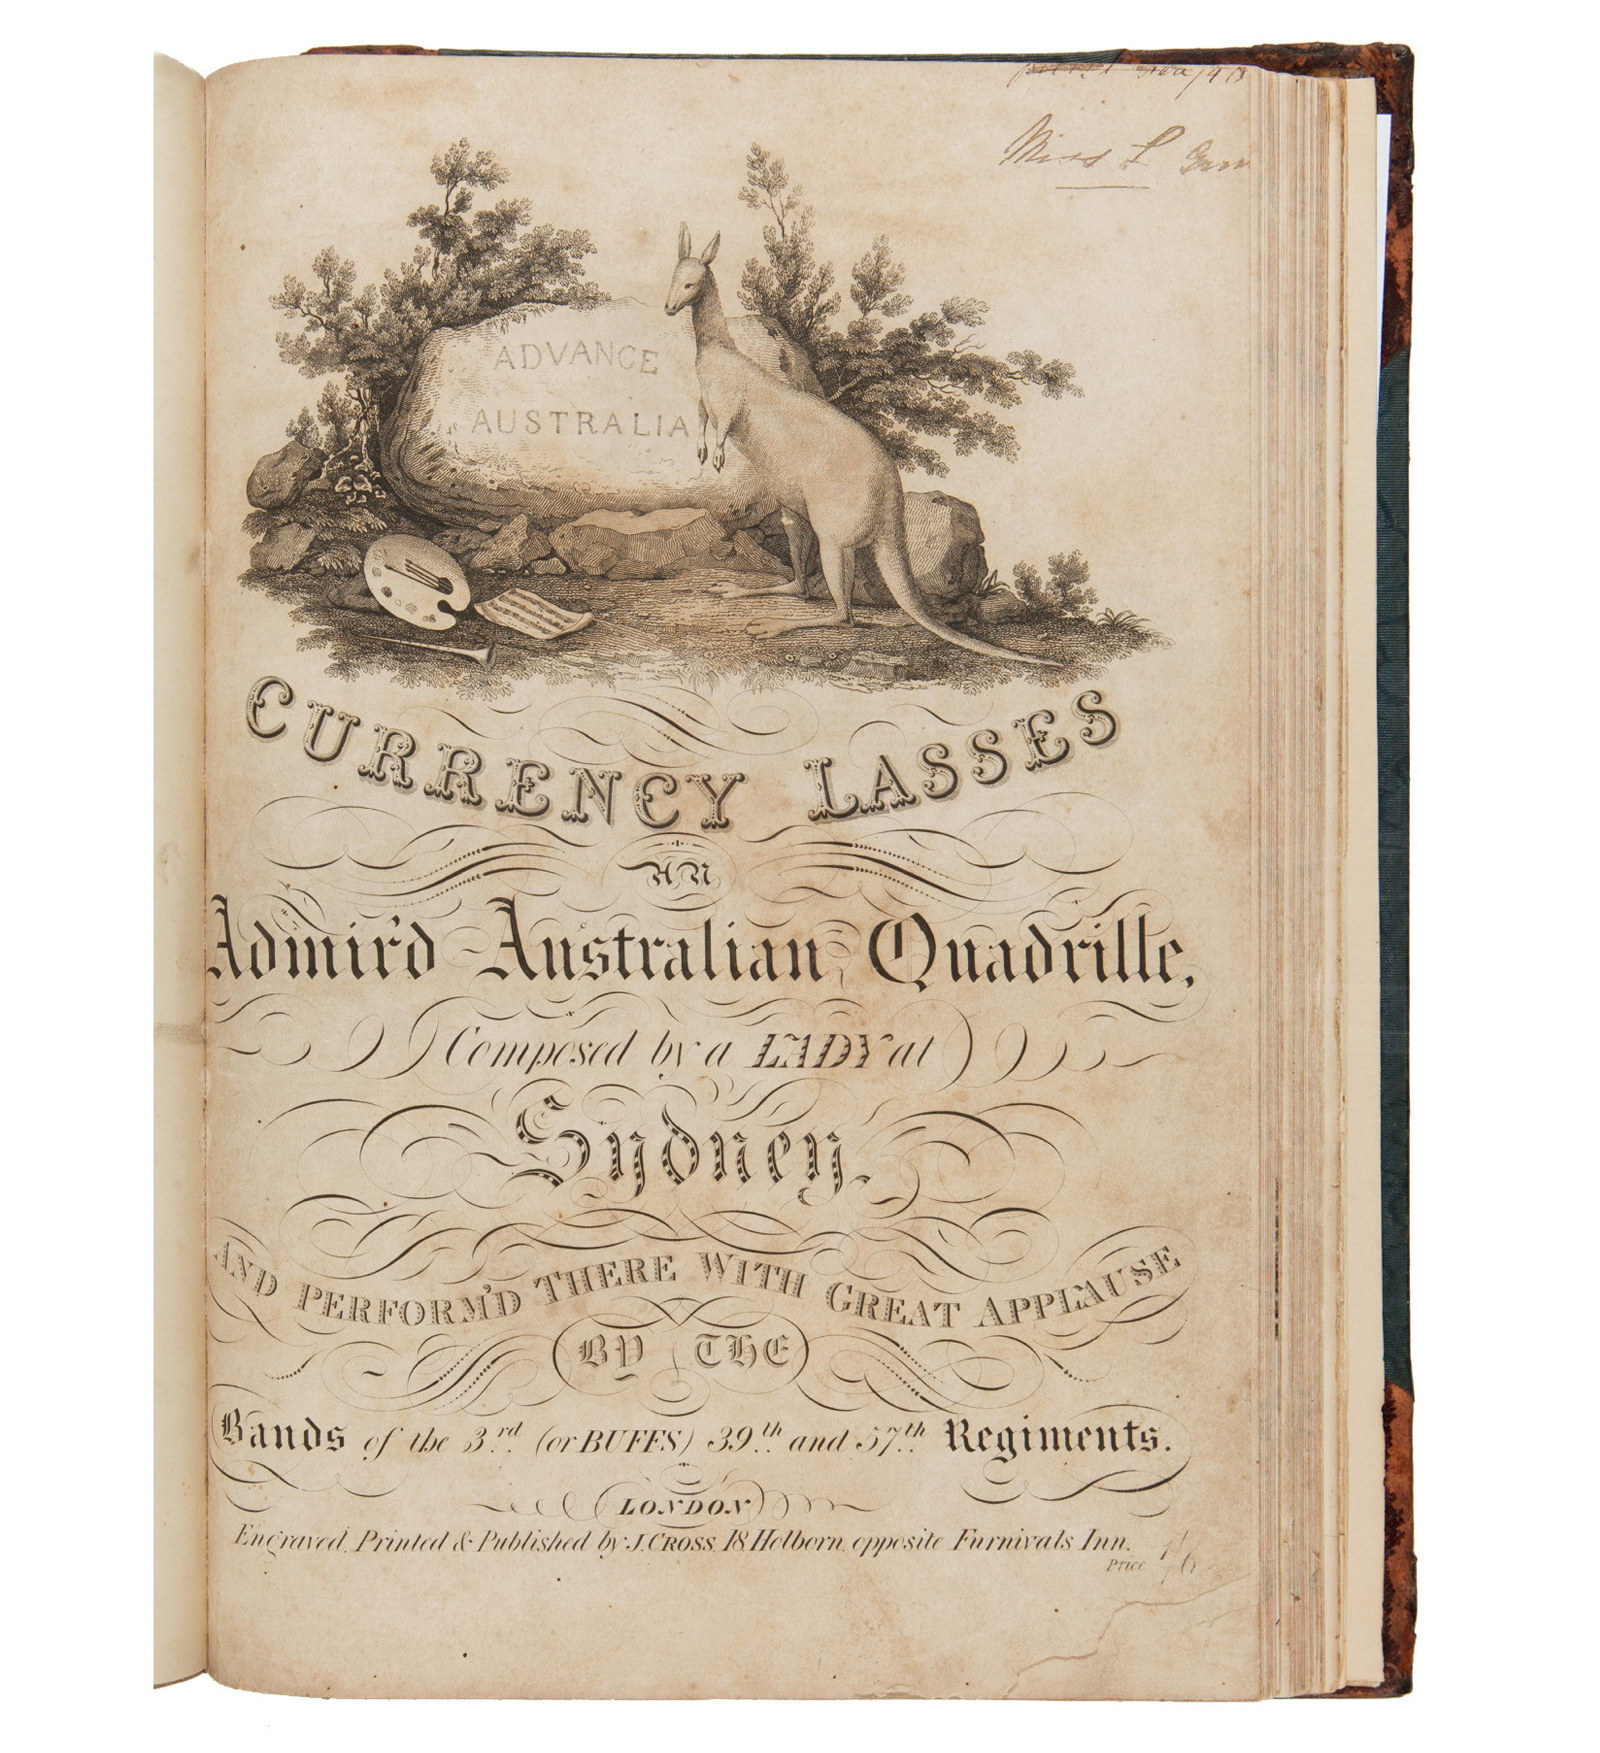 Cover page of 'Currency lasses, an admir'd Australian quadrille', composed by a Lady at Sydney